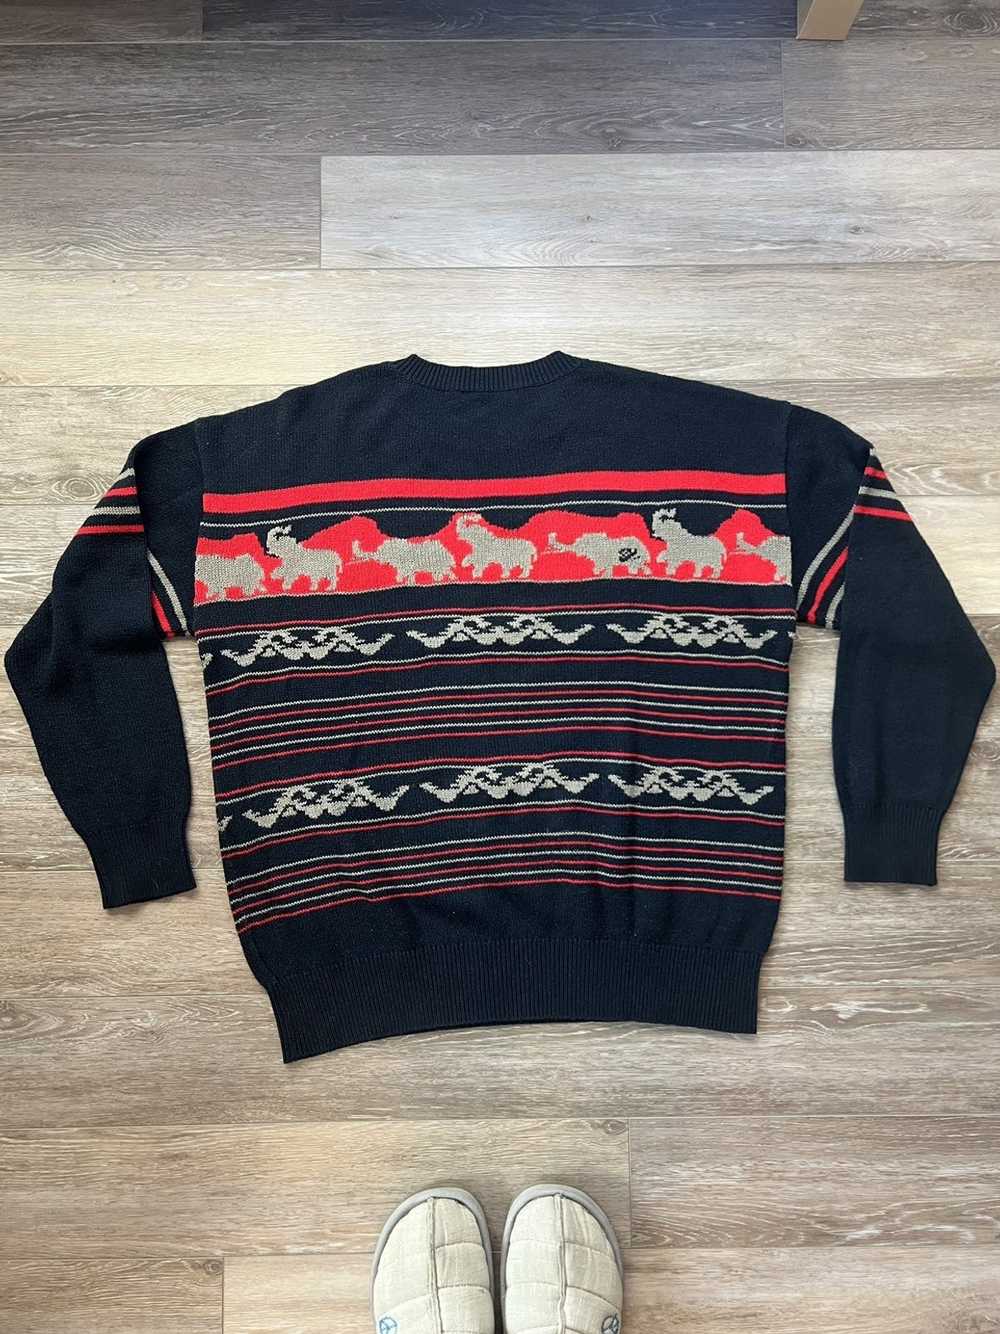 Undercover 1997 Elephant Knitted Sweater - image 3